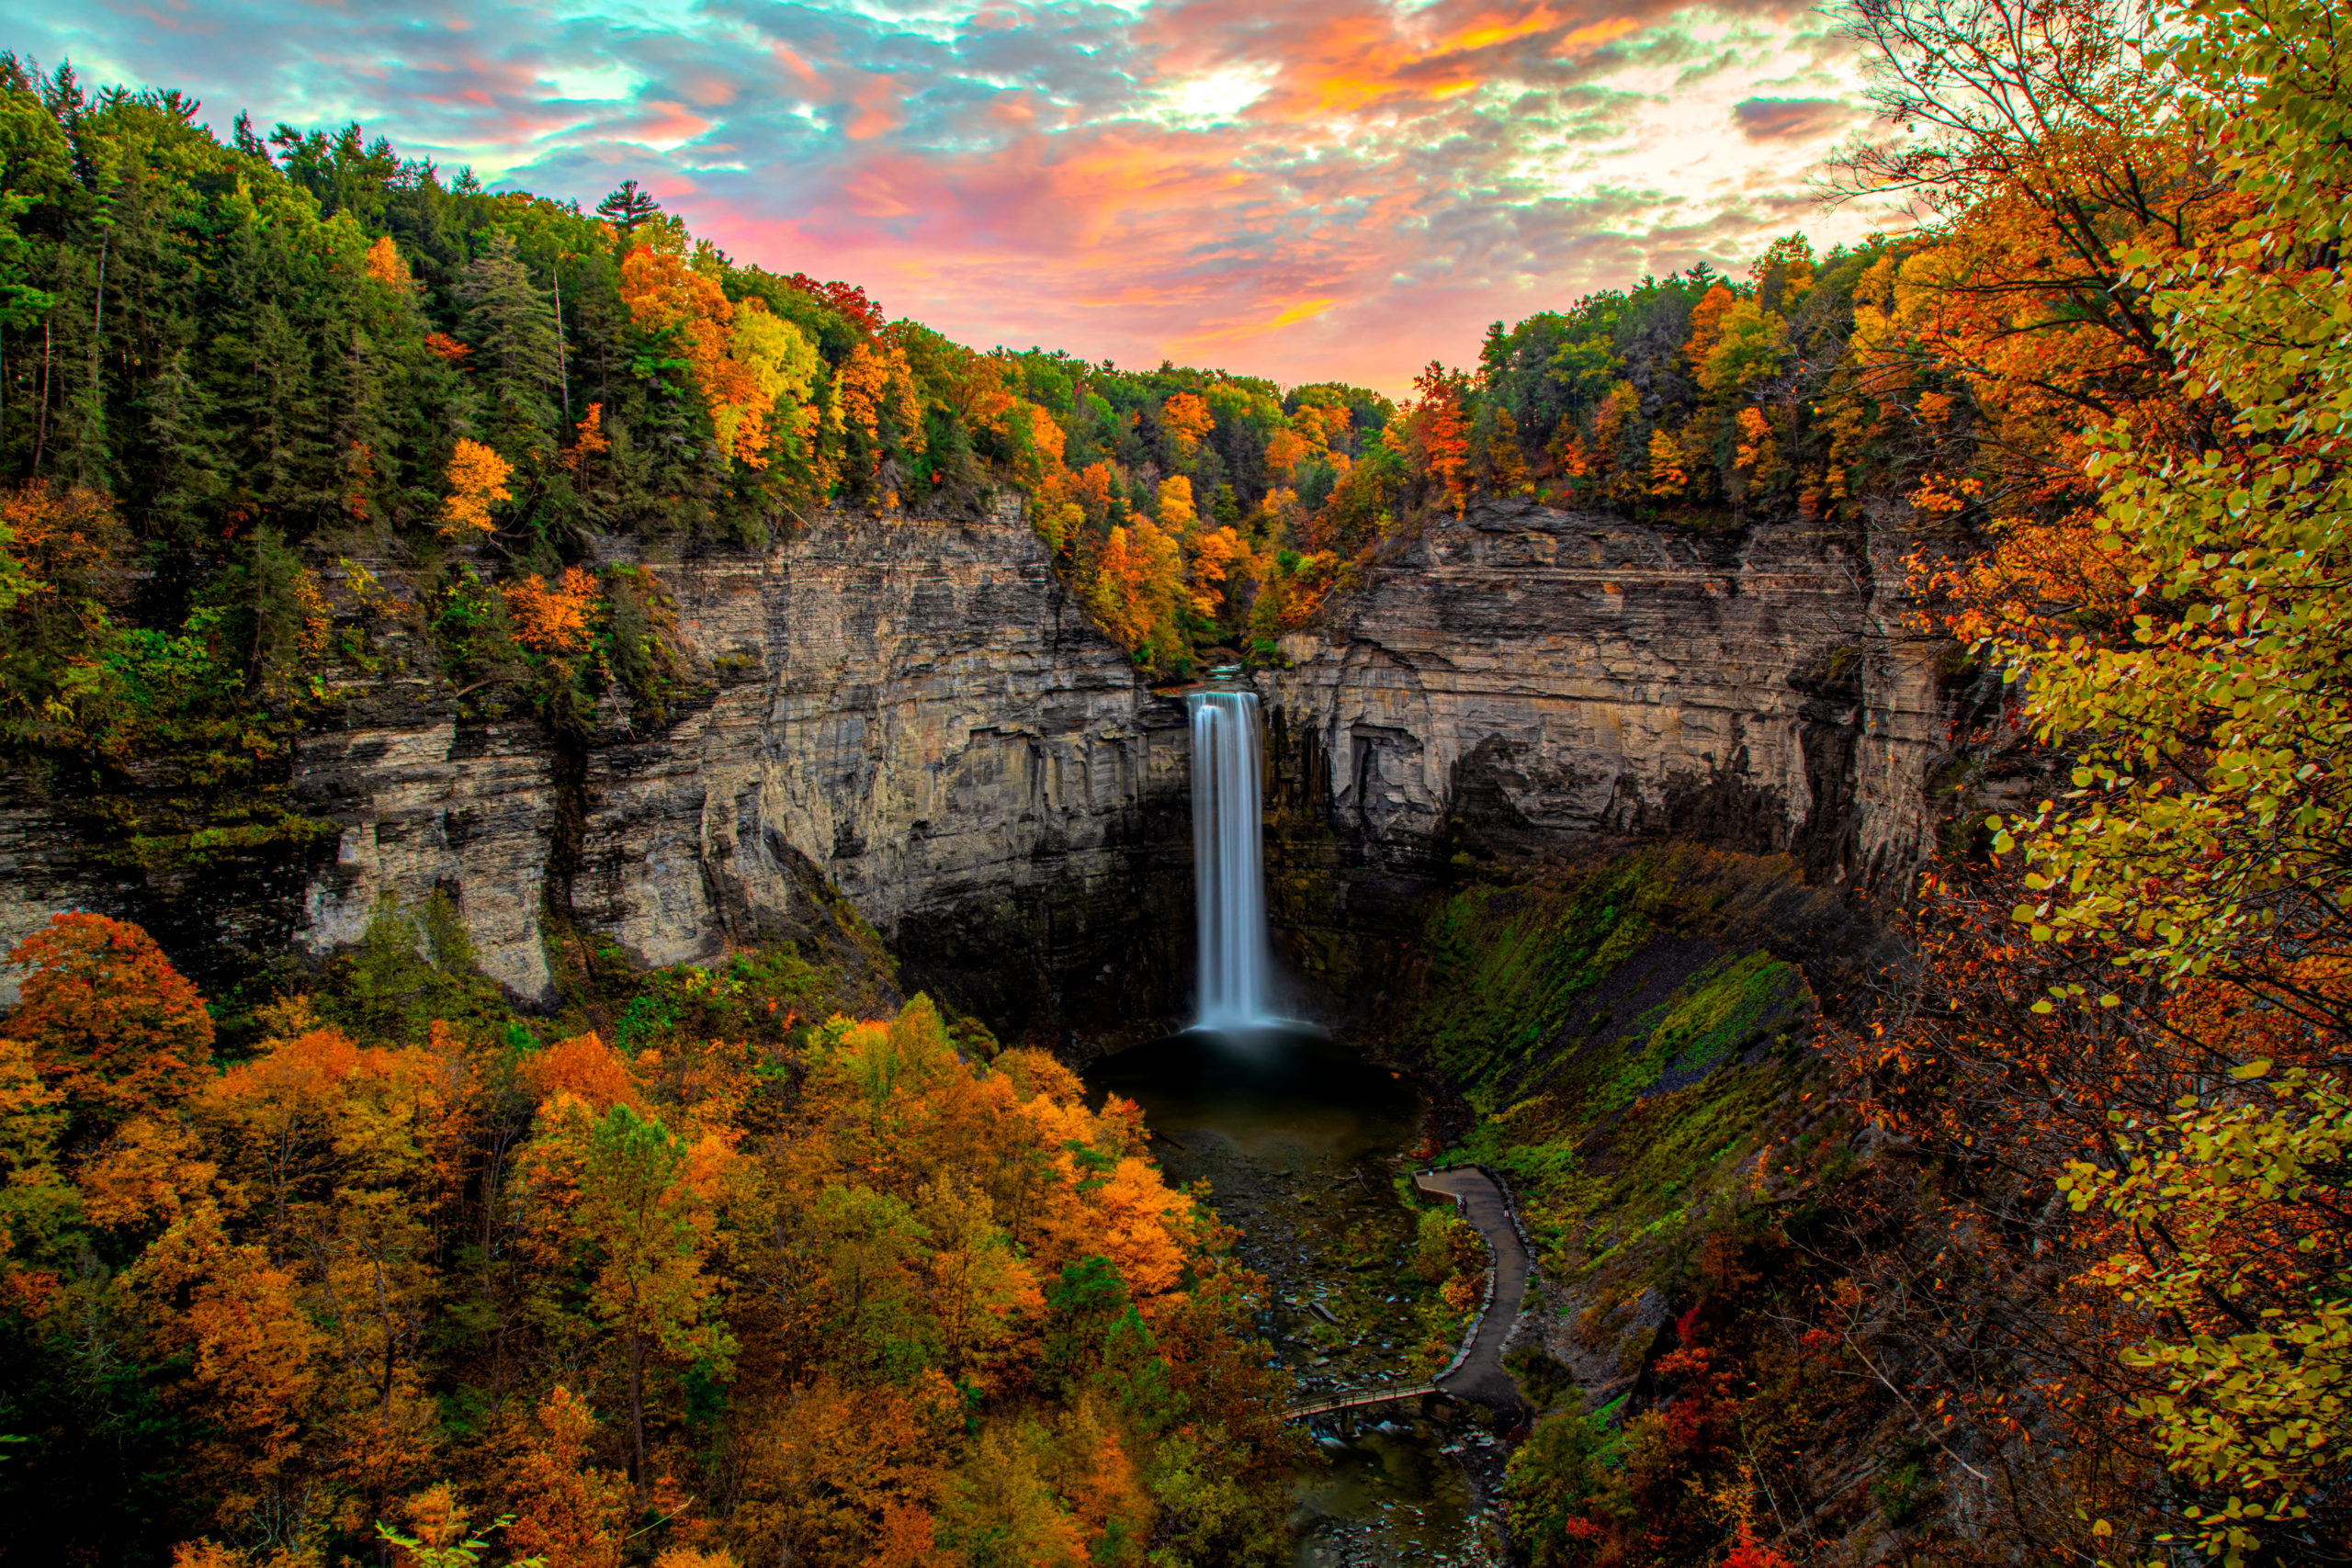 View of Taughannock Falls surrounded by fall foliage in New York, one of the best hikes in Upstate New York.